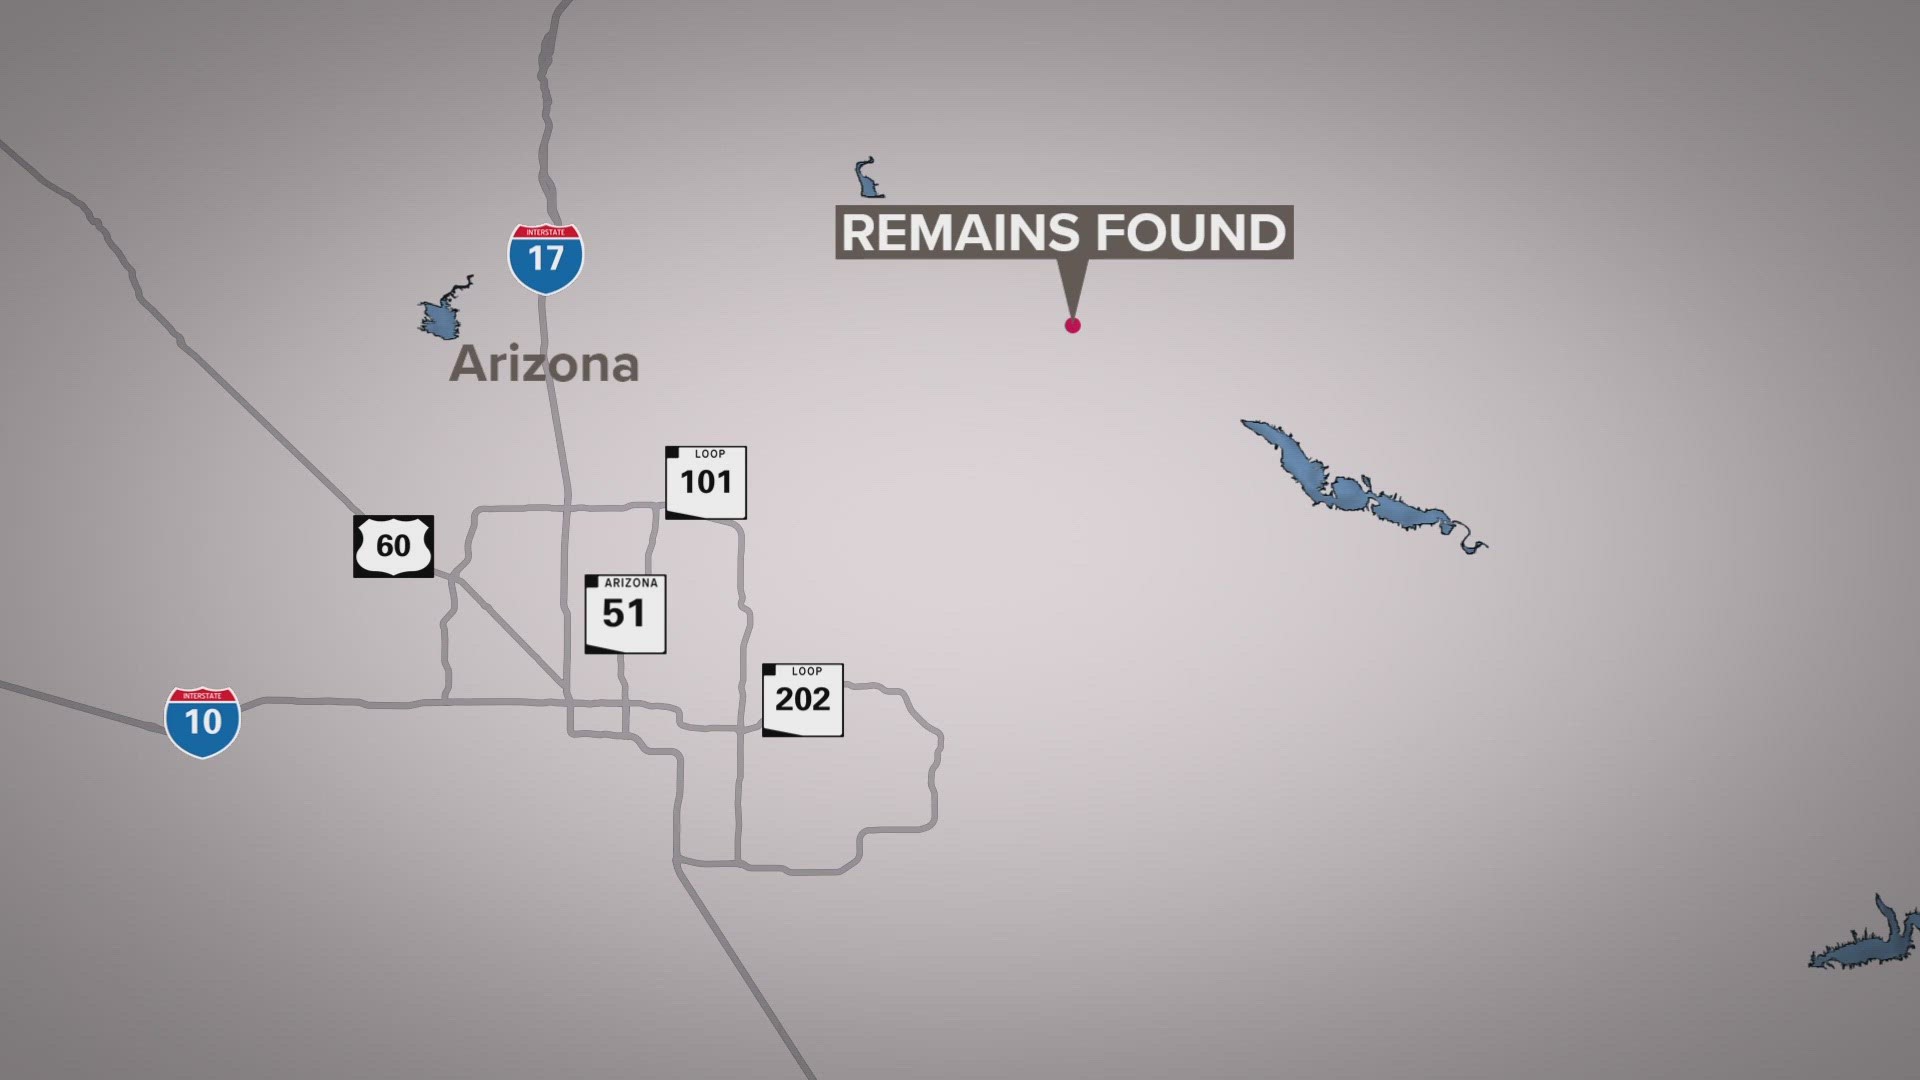 A man found what appeared to be parts of a skeleton in the Tonto National Forest along State Route 87.